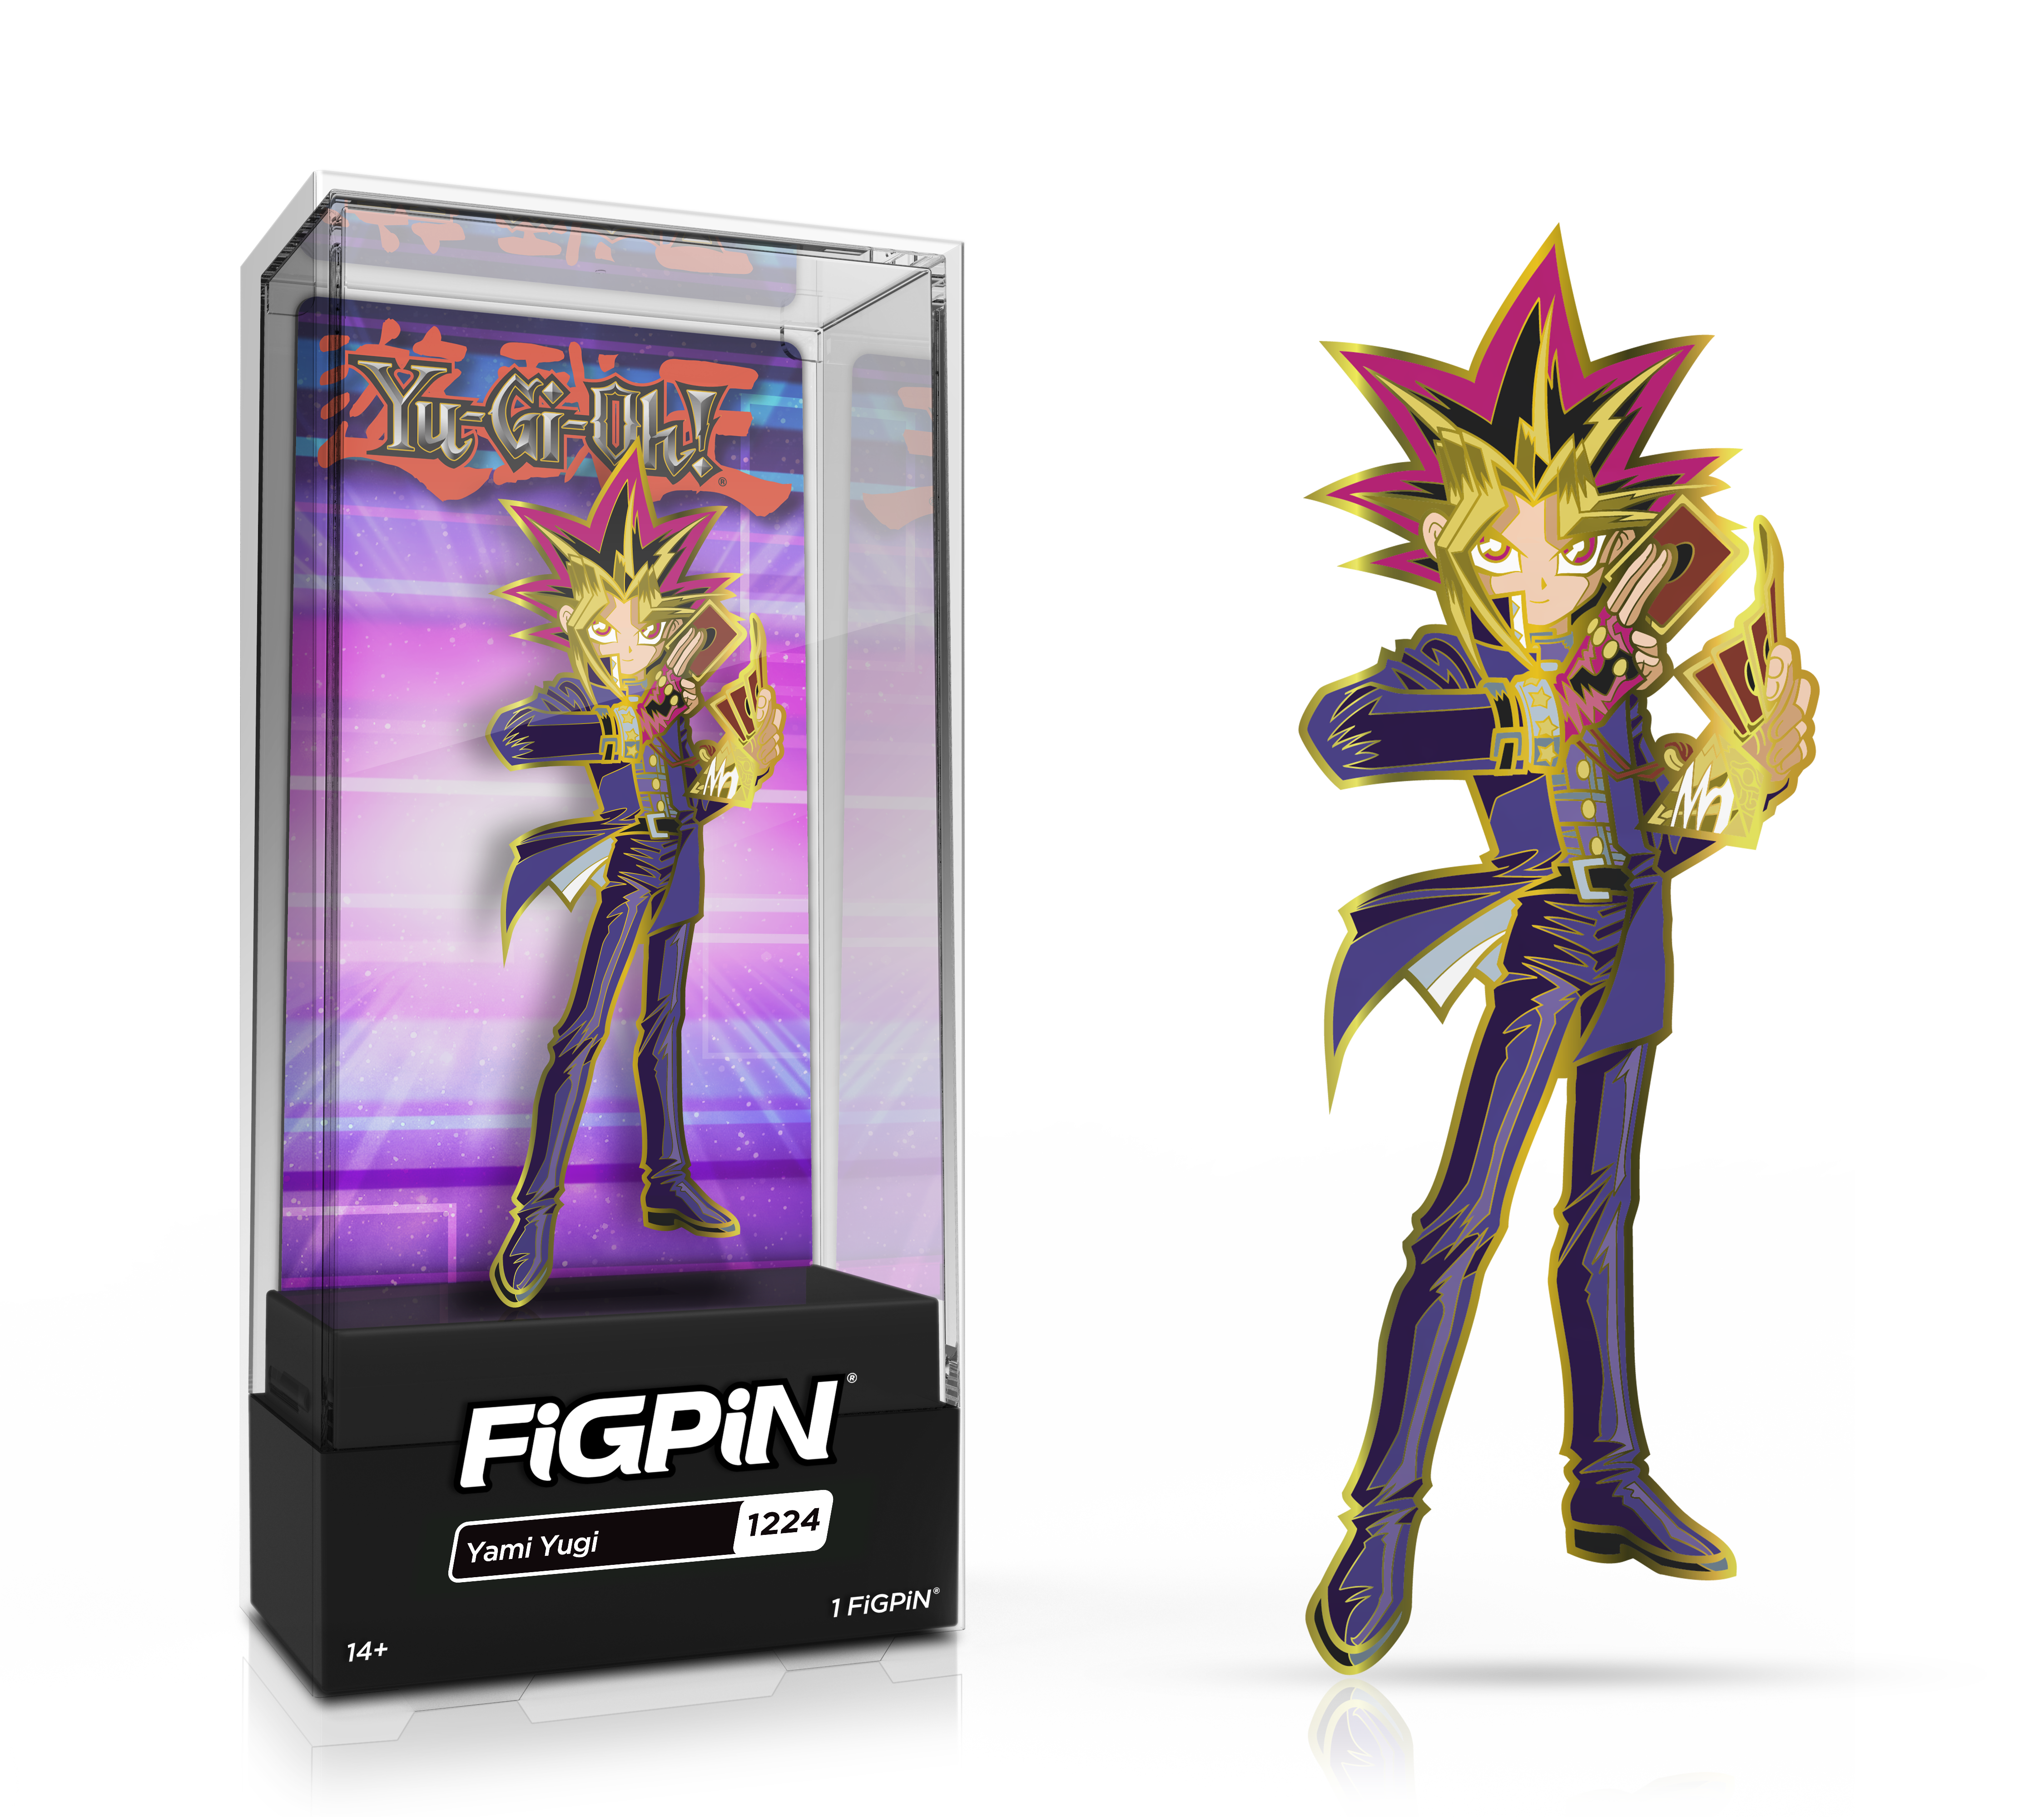 Side by side view of the Yami Yugi enamel pin in display case and the art render.